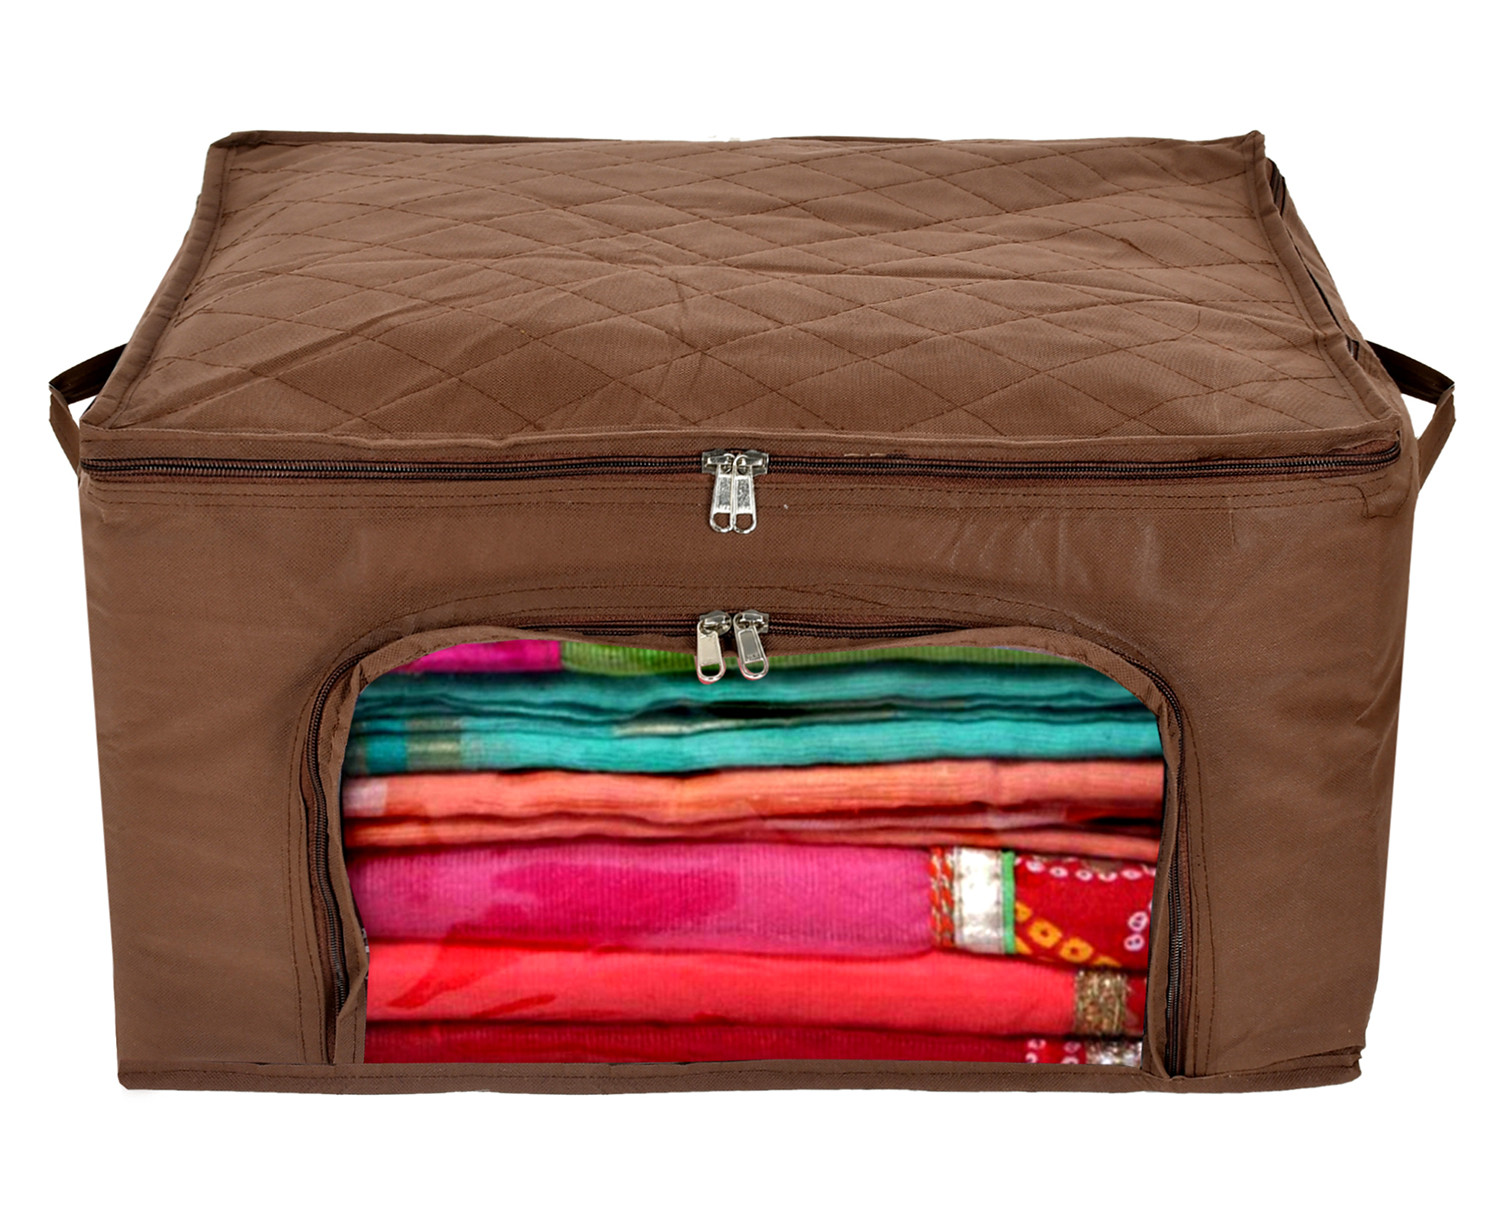 Kuber Industries Non-Woven Living Box, Underbed Storage, Cloth Storage Boxes for Wardrobe With Window (Brown) 54KM4095